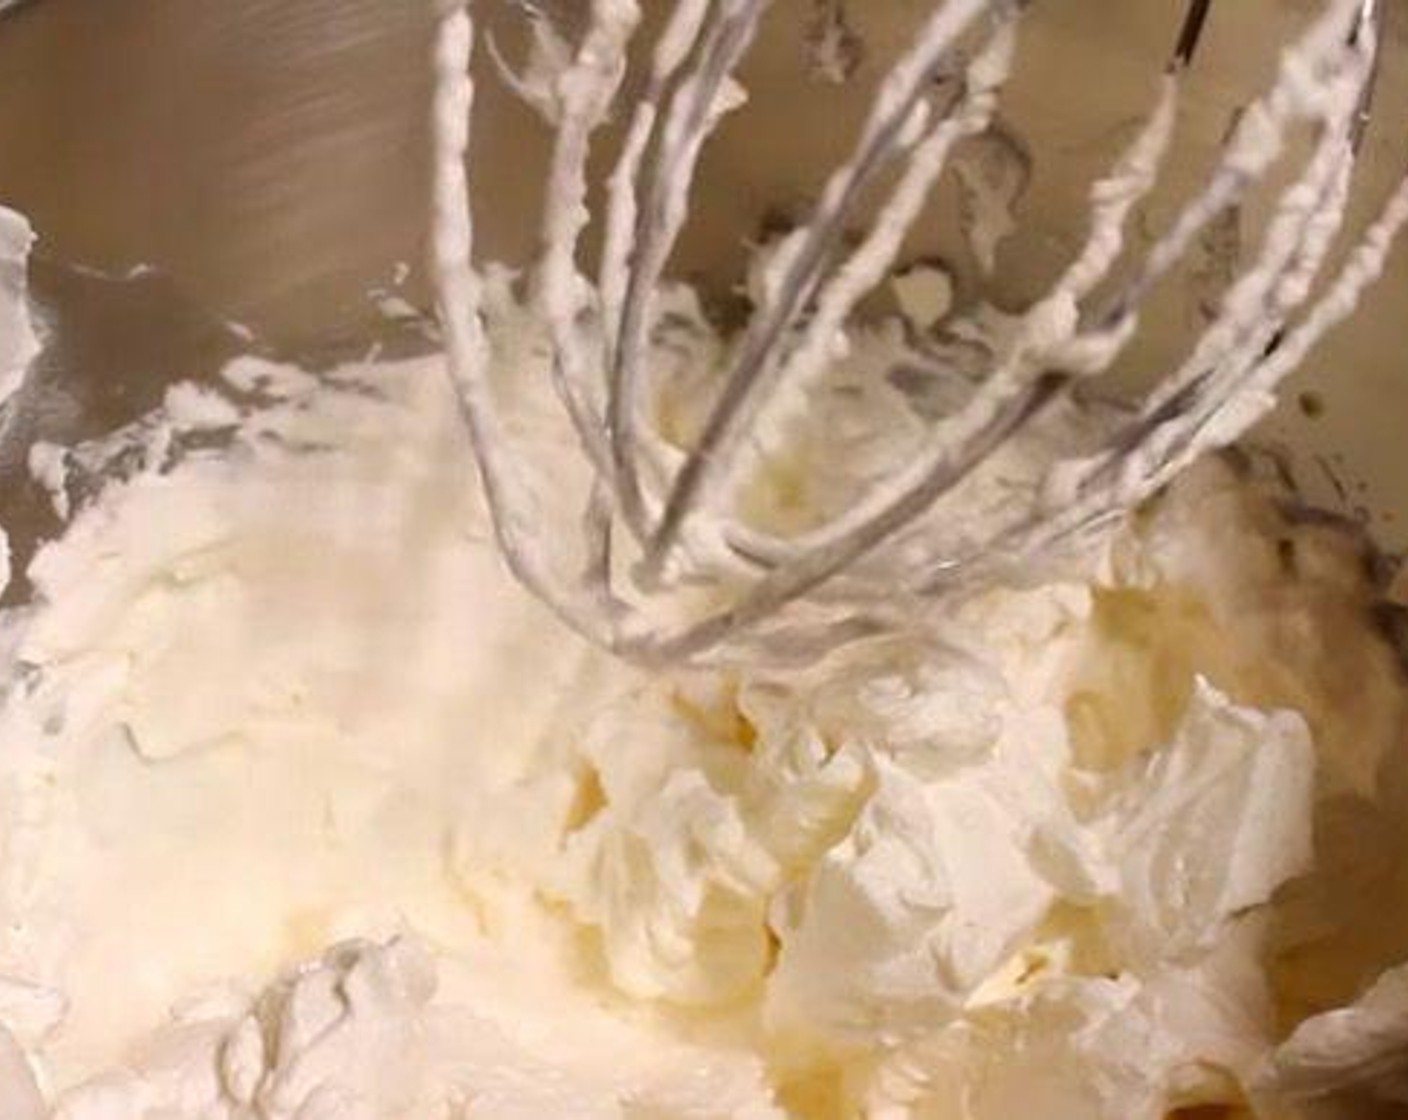 step 4 In a stand mixer or large bowl with a hand mixer, combine Heavy Cream (1 1/2 cups) and Vanilla Extract (1 tsp) and mix on medium-high speed until a stiff whipped cream is made. Be careful as to not mix too long or you'll get butter. Add to cooled egg and mascarpone mixture and fold gently to incorporate.